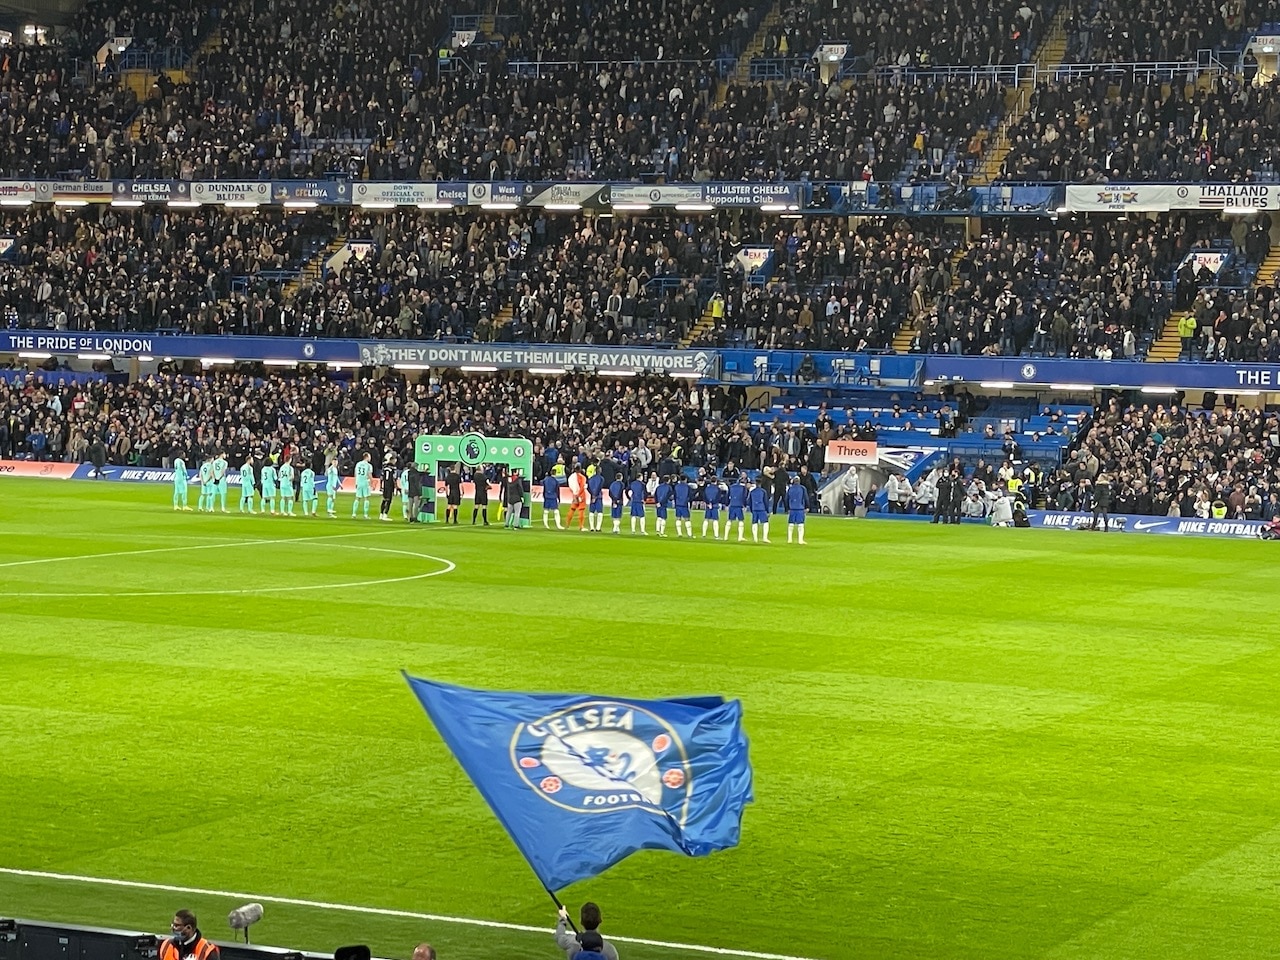 football players on the field at Chelsea FC before a game.